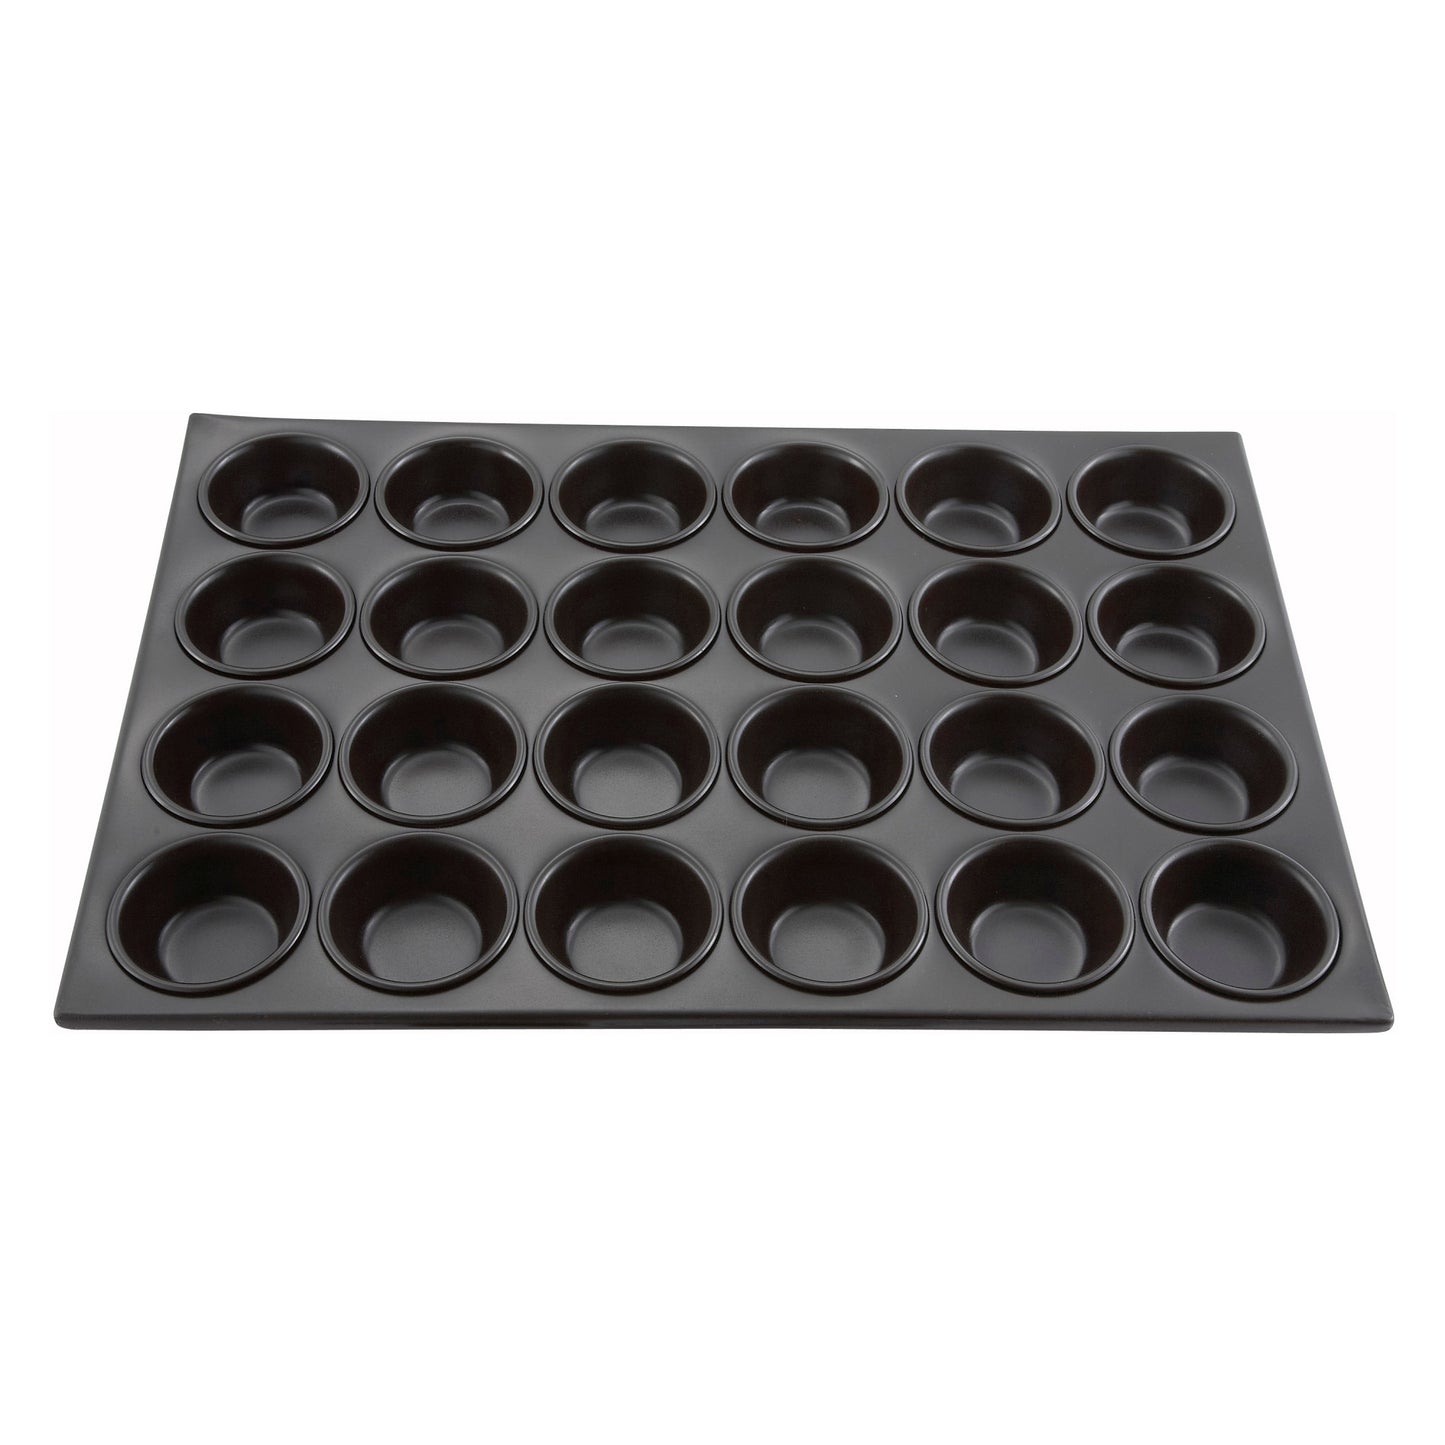 AMF-24NS - 24-Cup Non-Stick Muffin Pan - 3 oz